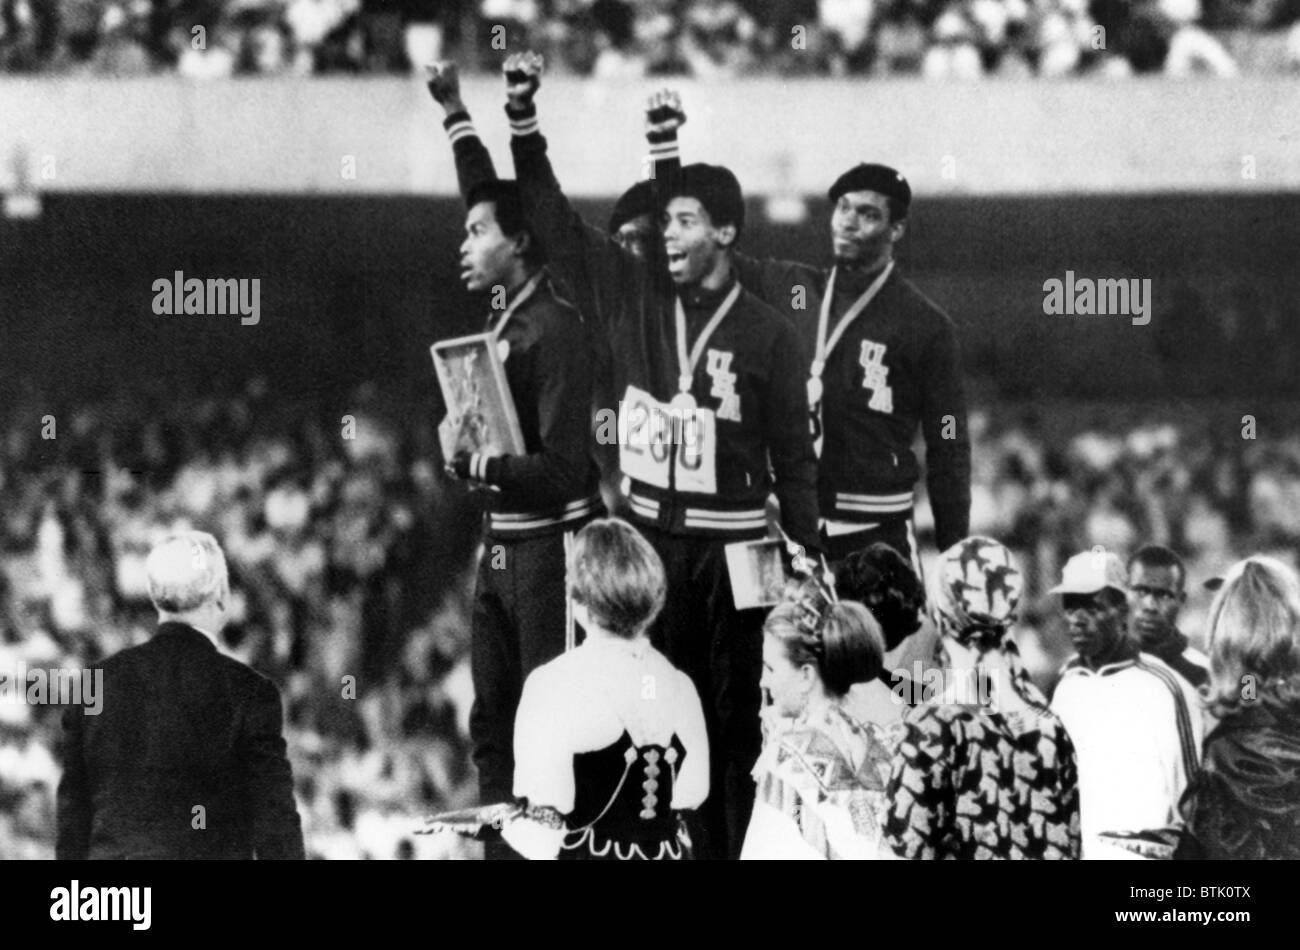 1968 Olympics, 4x400 Men's Relay Team gives 'Black Power' salute upon receiving Gold Medals. (L-R) Lee Evans, Ronald Freeman, La Stock Photo